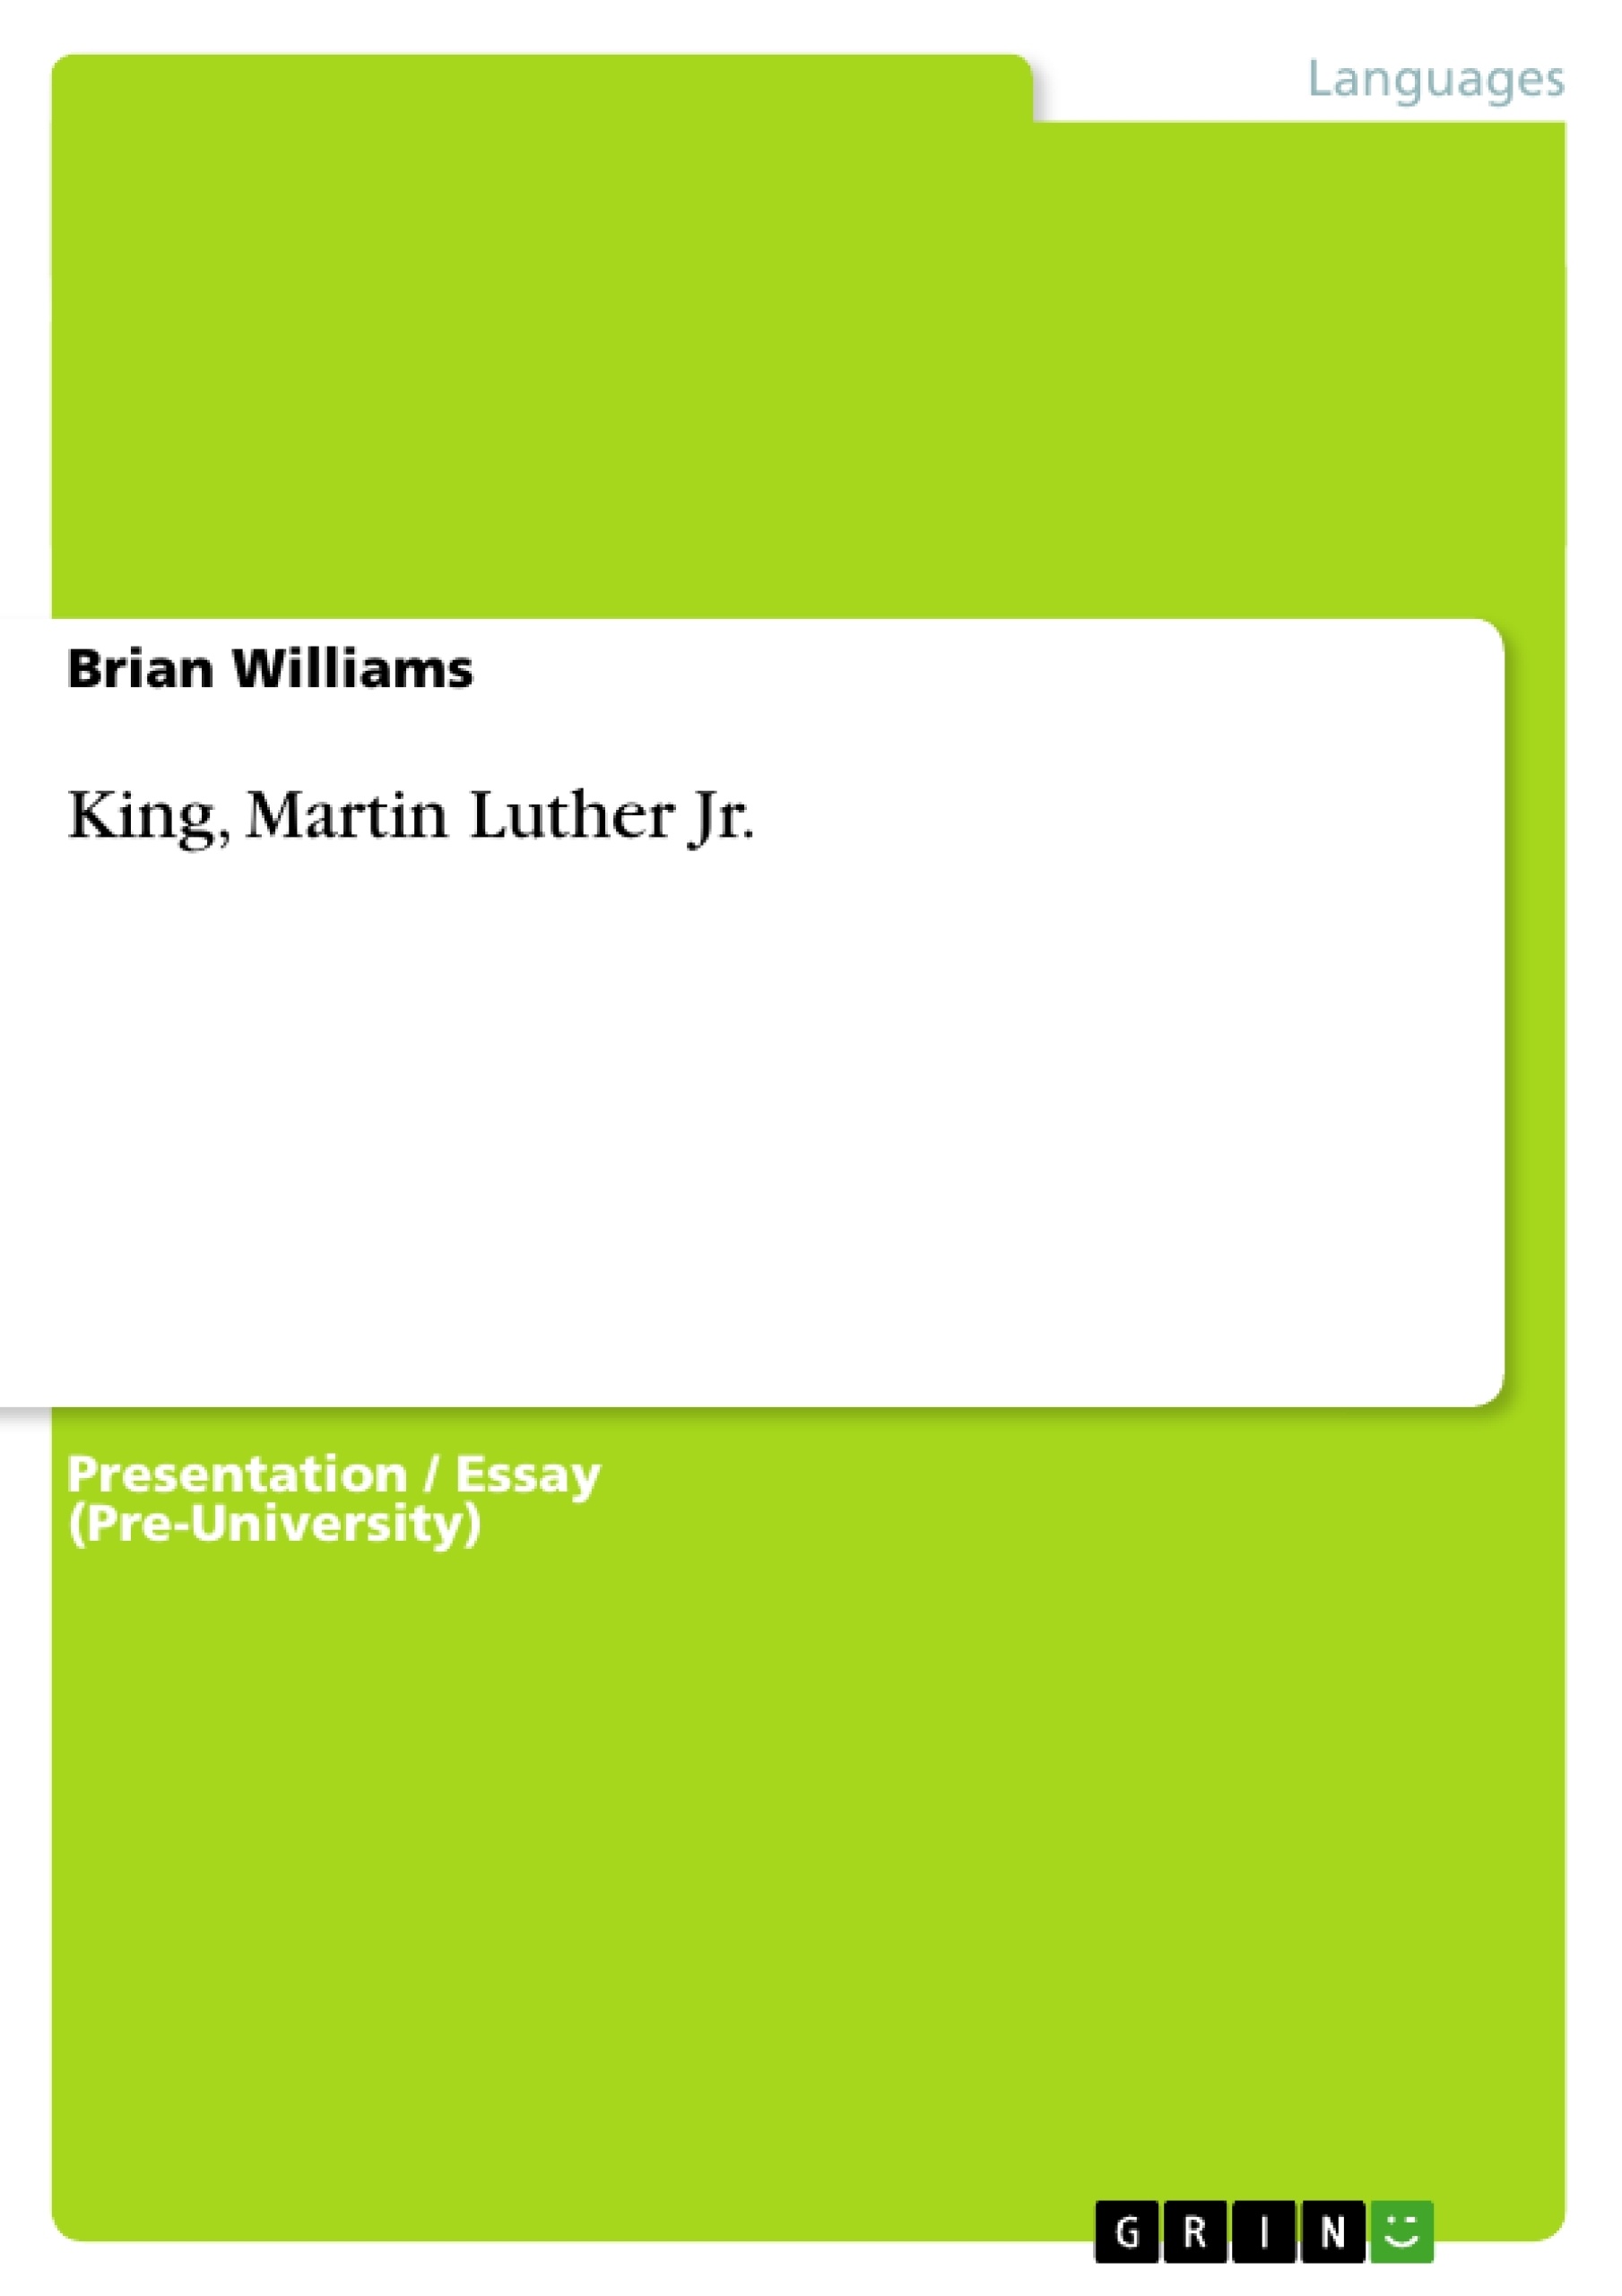 Title: King, Martin Luther Jr.